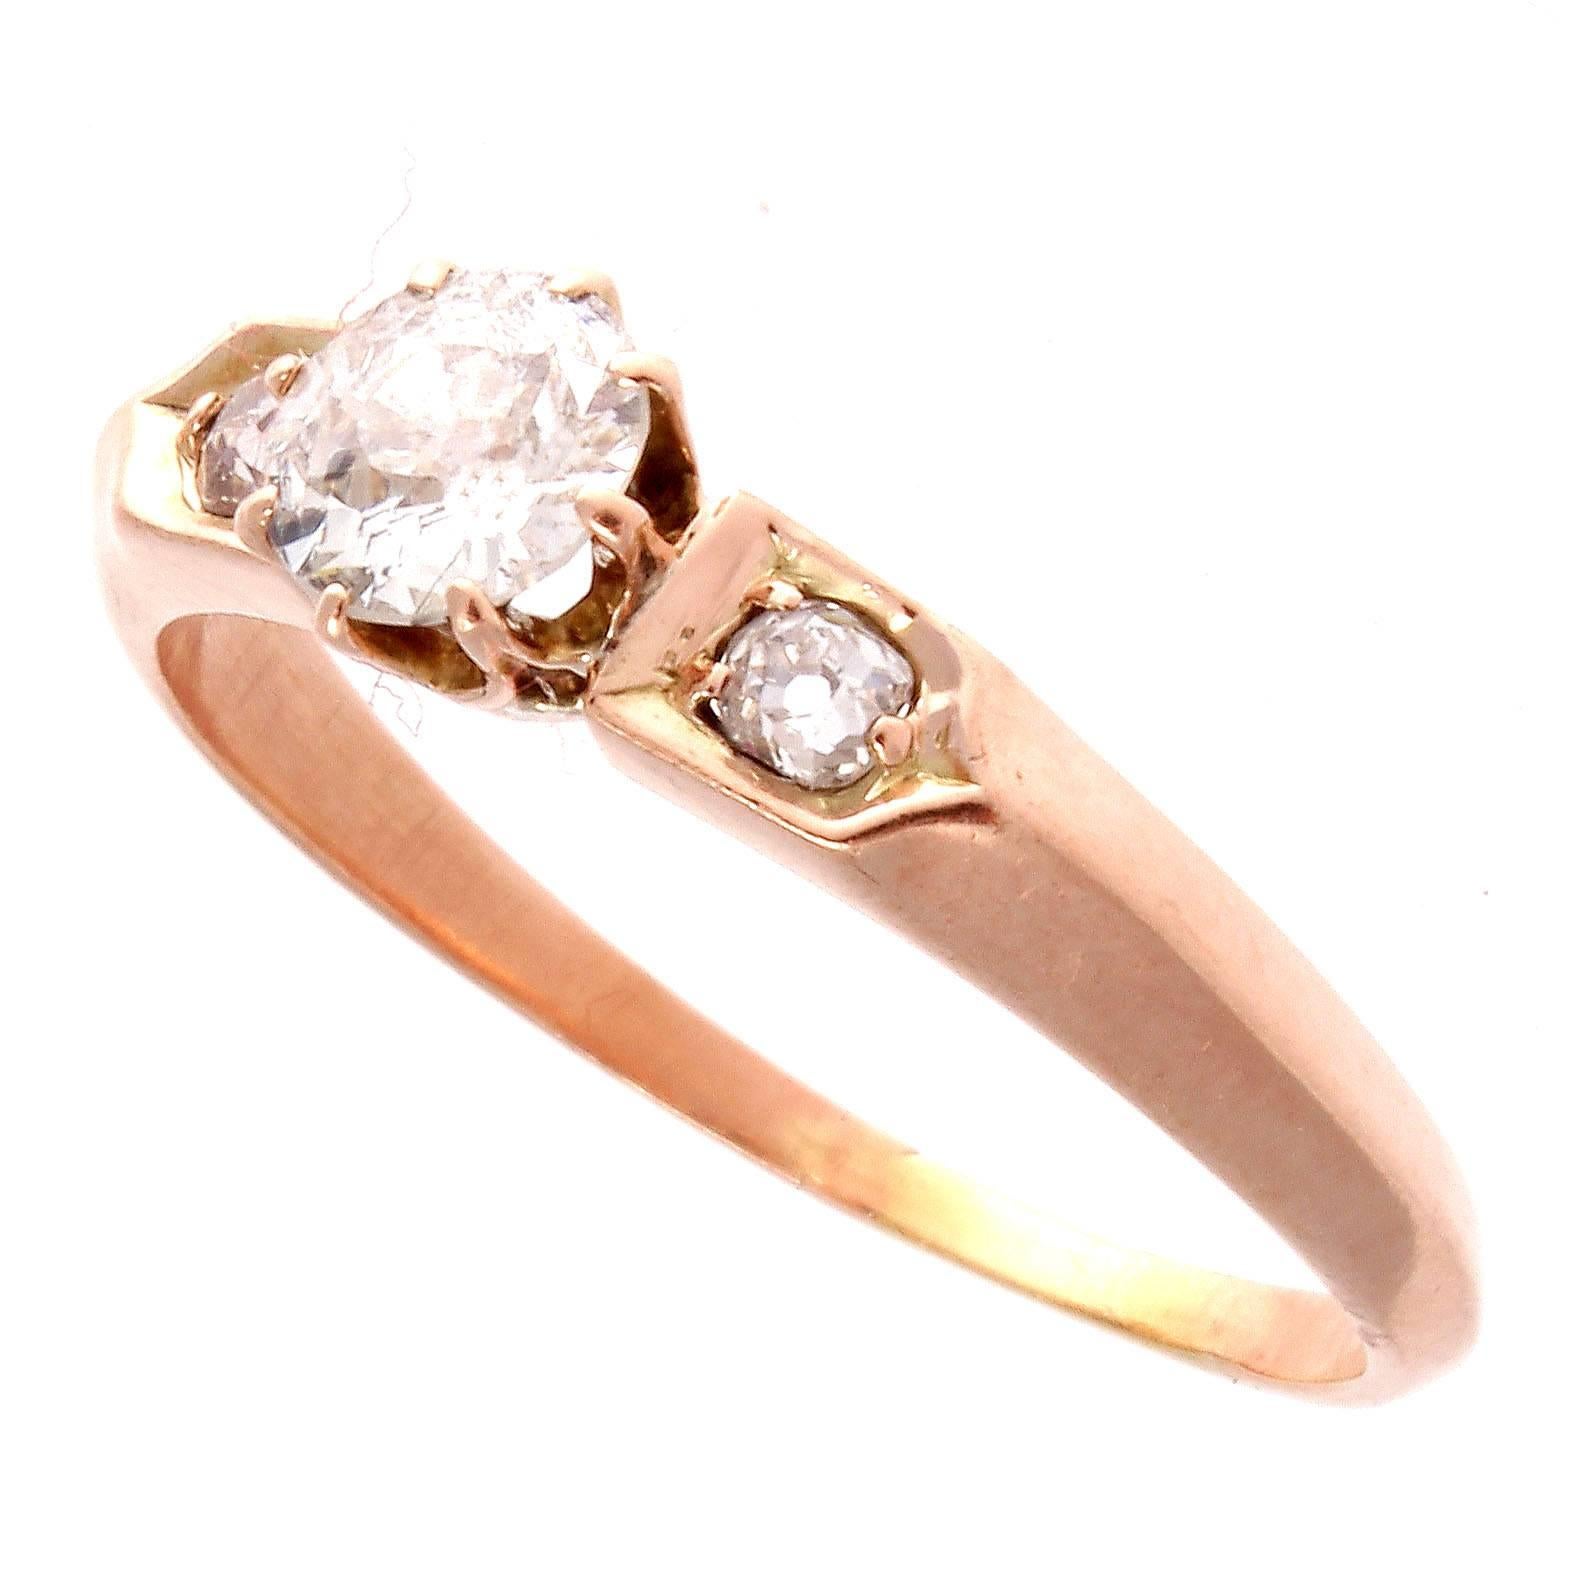 This lovely engagement ring is created in 18k gold and features an approximately 0.50 carats white old European cut diamond. A warm intimate ring that will last a lifetime. 

Ring size 7-1/2 and can easily be resized.